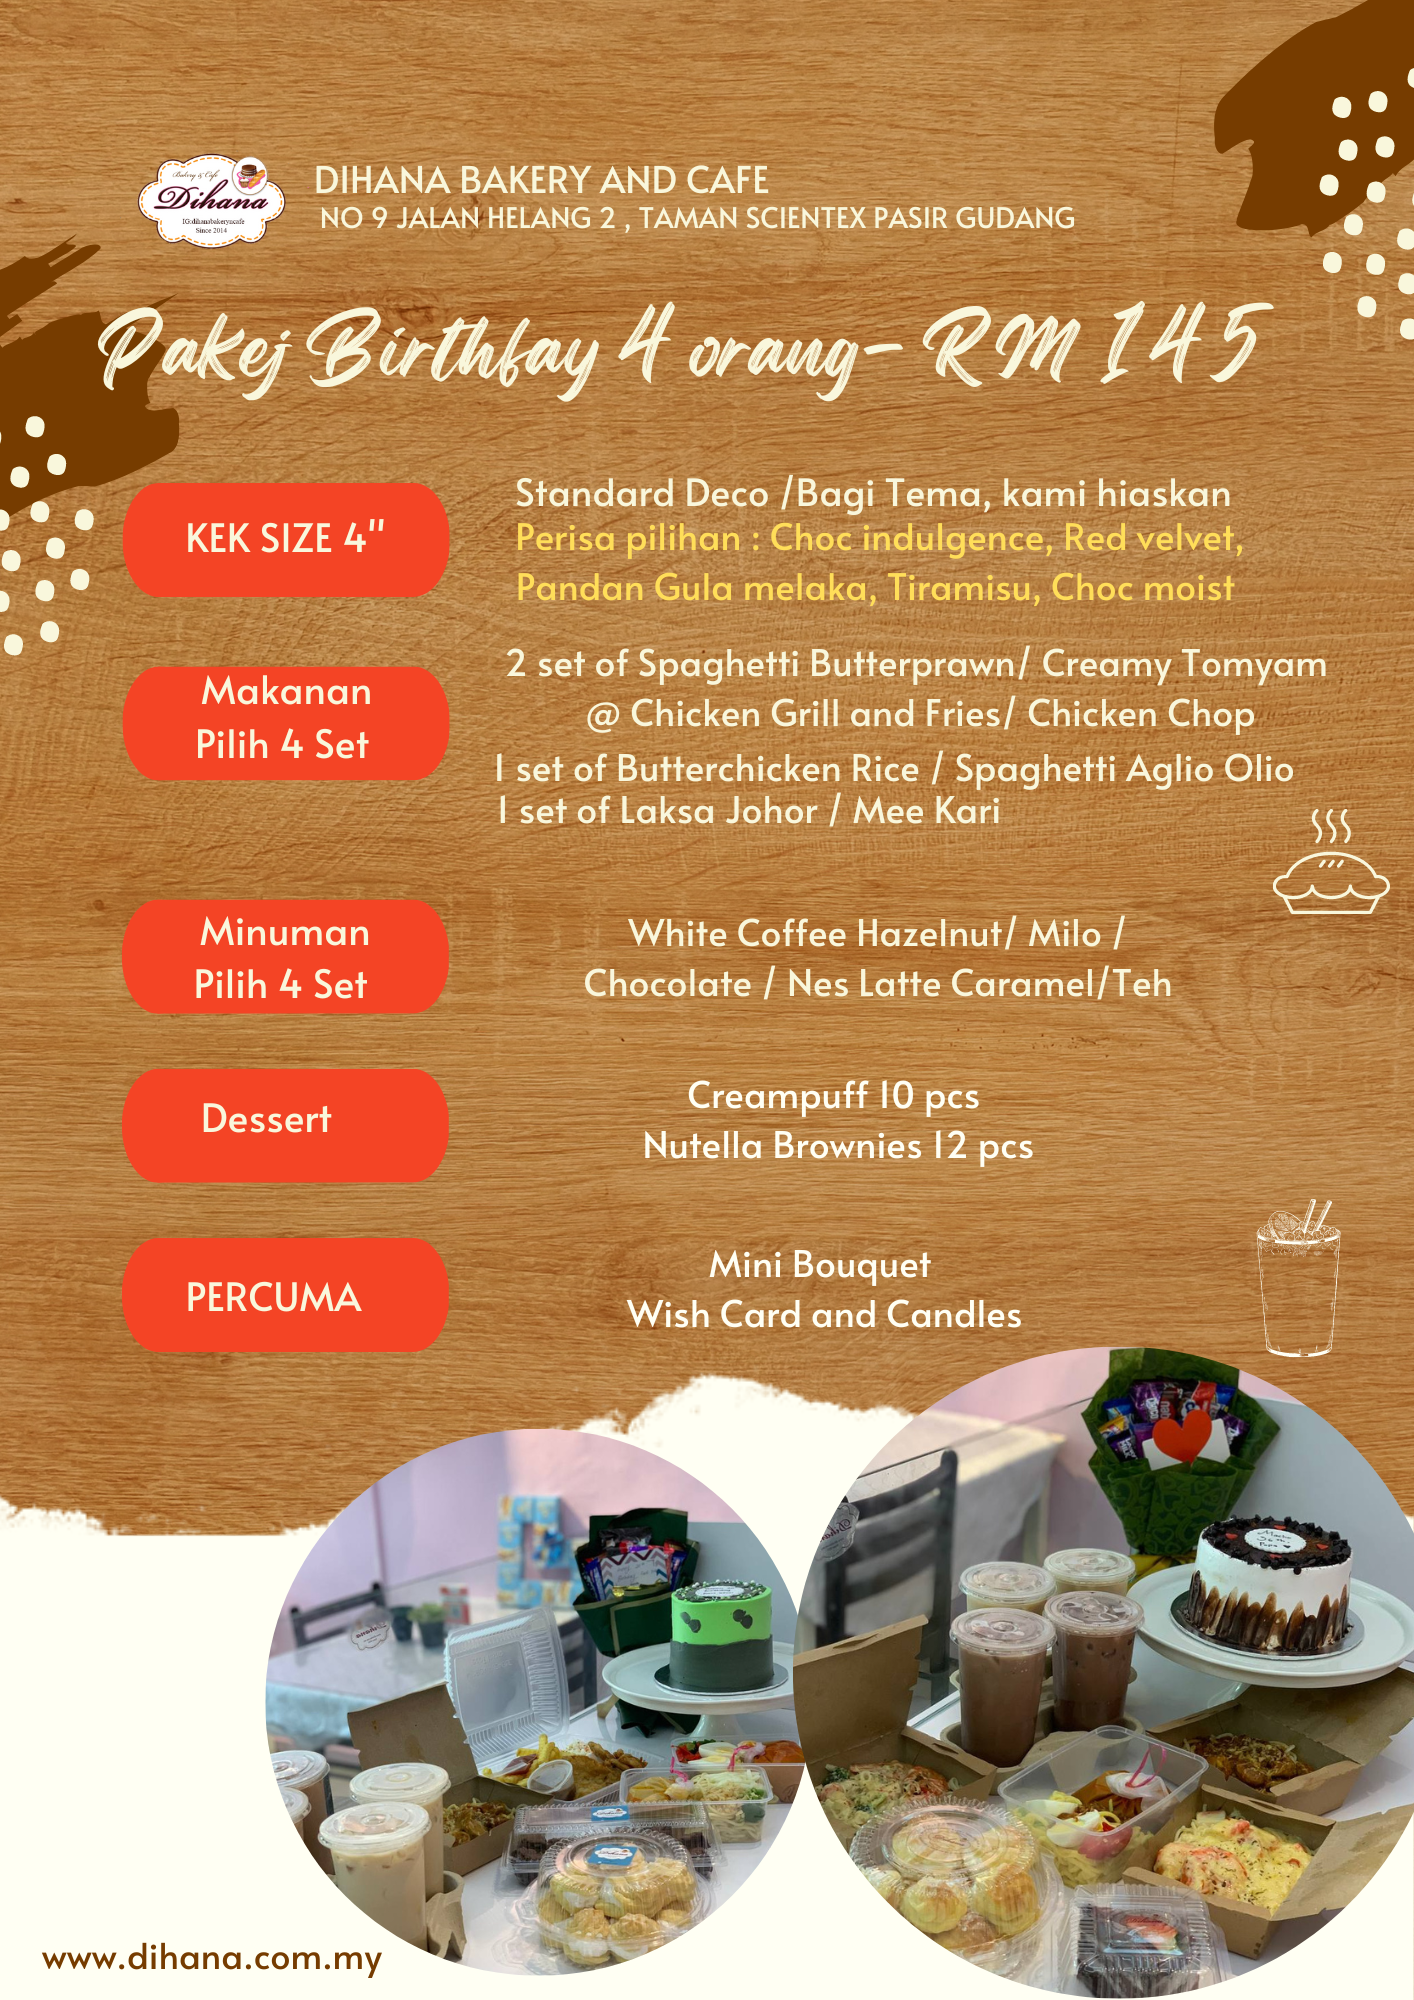 Birthday Package 4 Pax